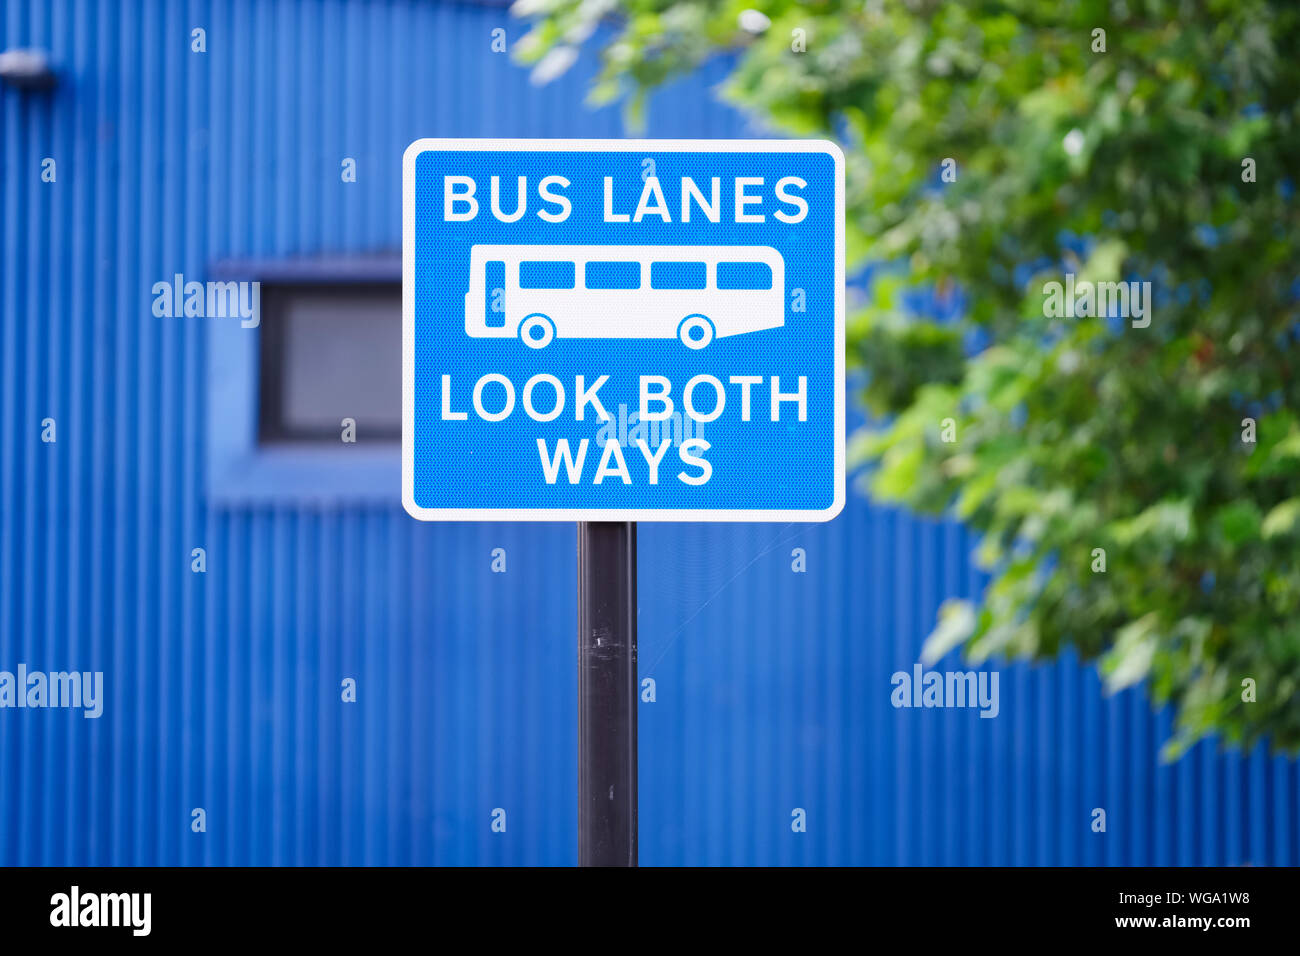 Bus lanes sign in city with look both ways warning Stock Photo